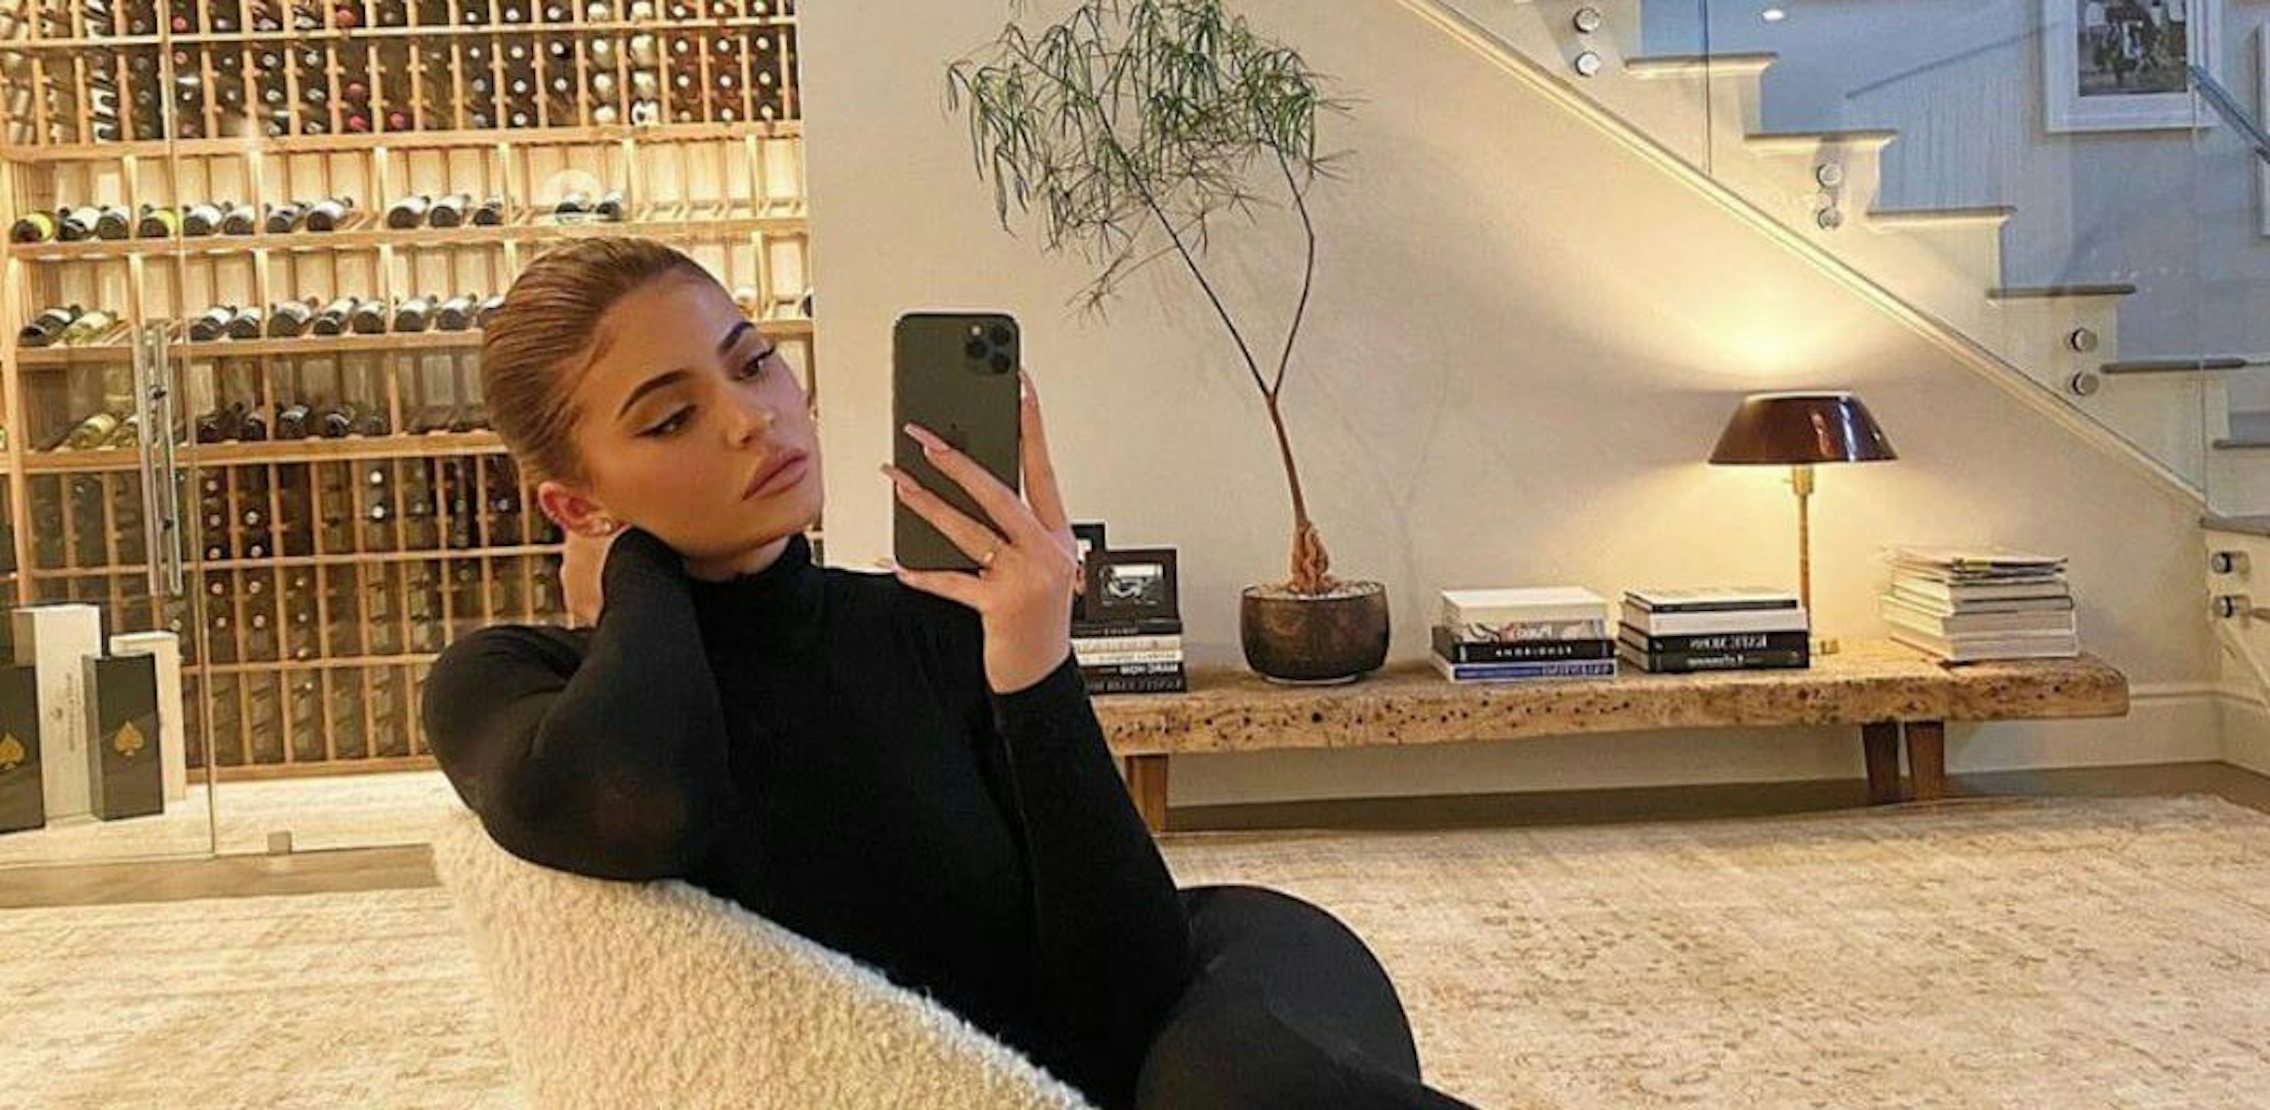 Kylie Jenner Blasted for Showing Off $450 Chopsticks During Pandemic